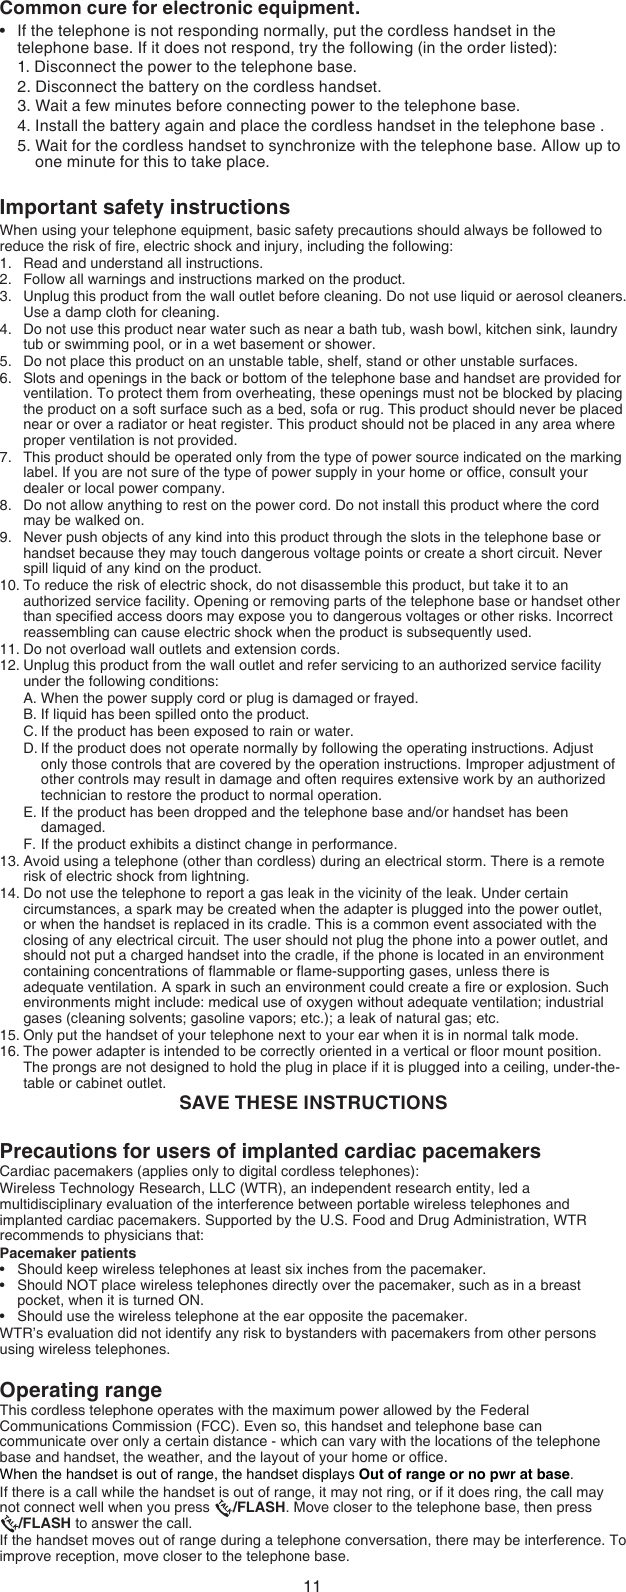 11Important safety instructionsWhen using your telephone equipment, basic safety precautions should always be followed to reduce the risk of ﬁre, electric shock and injury, including the following:Read and understand all instructions.Follow all warnings and instructions marked on the product.Unplug this product from the wall outlet before cleaning. Do not use liquid or aerosol cleaners. Use a damp cloth for cleaning.Do not use this product near water such as near a bath tub, wash bowl, kitchen sink, laundry tub or swimming pool, or in a wet basement or shower.Do not place this product on an unstable table, shelf, stand or other unstable surfaces.Slots and openings in the back or bottom of the telephone base and handset are provided for ventilation. To protect them from overheating, these openings must not be blocked by placing the product on a soft surface such as a bed, sofa or rug. This product should never be placed near or over a radiator or heat register. This product should not be placed in any area where proper ventilation is not provided.This product should be operated only from the type of power source indicated on the marking label. If you are not sure of the type of power supply in your home or ofﬁce, consult your dealer or local power company.Do not allow anything to rest on the power cord. Do not install this product where the cord may be walked on.Never push objects of any kind into this product through the slots in the telephone base or handset because they may touch dangerous voltage points or create a short circuit. Never spill liquid of any kind on the product.To reduce the risk of electric shock, do not disassemble this product, but take it to an authorized service facility. Opening or removing parts of the telephone base or handset other than speciﬁed access doors may expose you to dangerous voltages or other risks. Incorrect reassembling can cause electric shock when the product is subsequently used.Do not overload wall outlets and extension cords. Unplug this product from the wall outlet and refer servicing to an authorized service facility under the following conditions:When the power supply cord or plug is damaged or frayed.If liquid has been spilled onto the product.If the product has been exposed to rain or water.If the product does not operate normally by following the operating instructions. Adjust only those controls that are covered by the operation instructions. Improper adjustment of other controls may result in damage and often requires extensive work by an authorized technician to restore the product to normal operation.If the product has been dropped and the telephone base and/or handset has been damaged.If the product exhibits a distinct change in performance.Avoid using a telephone (other than cordless) during an electrical storm. There is a remote risk of electric shock from lightning.Do not use the telephone to report a gas leak in the vicinity of the leak. Under certain circumstances, a spark may be created when the adapter is plugged into the power outlet, or when the handset is replaced in its cradle. This is a common event associated with the closing of any electrical circuit. The user should not plug the phone into a power outlet, and should not put a charged handset into the cradle, if the phone is located in an environment containing concentrations of ﬂammable or ﬂame-supporting gases, unless there is adequate ventilation. A spark in such an environment could create a ﬁre or explosion. Such environments might include: medical use of oxygen without adequate ventilation; industrial gases (cleaning solvents; gasoline vapors; etc.); a leak of natural gas; etc.Only put the handset of your telephone next to your ear when it is in normal talk mode.The power adapter is intended to be correctly oriented in a vertical or ﬂoor mount position. The prongs are not designed to hold the plug in place if it is plugged into a ceiling, under-the-table or cabinet outlet.SAVE THESE INSTRUCTIONS1.2.3.4.5.6.7.8.9.10.11.12.A.B.C.D.E.F.13.14.15.16.Precautions for users of implanted cardiac pacemakersCardiac pacemakers (applies only to digital cordless telephones):Wireless Technology Research, LLC (WTR), an independent research entity, led a multidisciplinary evaluation of the interference between portable wireless telephones and implanted cardiac pacemakers. Supported by the U.S. Food and Drug Administration, WTR recommends to physicians that:Pacemaker patientsShould keep wireless telephones at least six inches from the pacemaker.Should NOT place wireless telephones directly over the pacemaker, such as in a breast pocket, when it is turned ON.Should use the wireless telephone at the ear opposite the pacemaker.WTR’s evaluation did not identify any risk to bystanders with pacemakers from other persons using wireless telephones.Operating rangeThis cordless telephone operates with the maximum power allowed by the Federal Communications Commission (FCC). Even so, this handset and telephone base can communicate over only a certain distance - which can vary with the locations of the telephone base and handset, the weather, and the layout of your home or ofﬁce.When the handset is out of range, the handset displays Out of range or no pwr at base.If there is a call while the handset is out of range, it may not ring, or if it does ring, the call may  not connect well when you press  /FLASH. Move closer to the telephone base, then press   /FLASH to answer the call.If the handset moves out of range during a telephone conversation, there may be interference. To improve reception, move closer to the telephone base.•••Common cure for electronic equipment.If the telephone is not responding normally, put the cordless handset in the  telephone base. If it does not respond, try the following (in the order listed):1. Disconnect the power to the telephone base.2. Disconnect the battery on the cordless handset.3. Wait a few minutes before connecting power to the telephone base.4. Install the battery again and place the cordless handset in the telephone base .5. Wait for the cordless handset to synchronize with the telephone base. Allow up to      one minute for this to take place.•